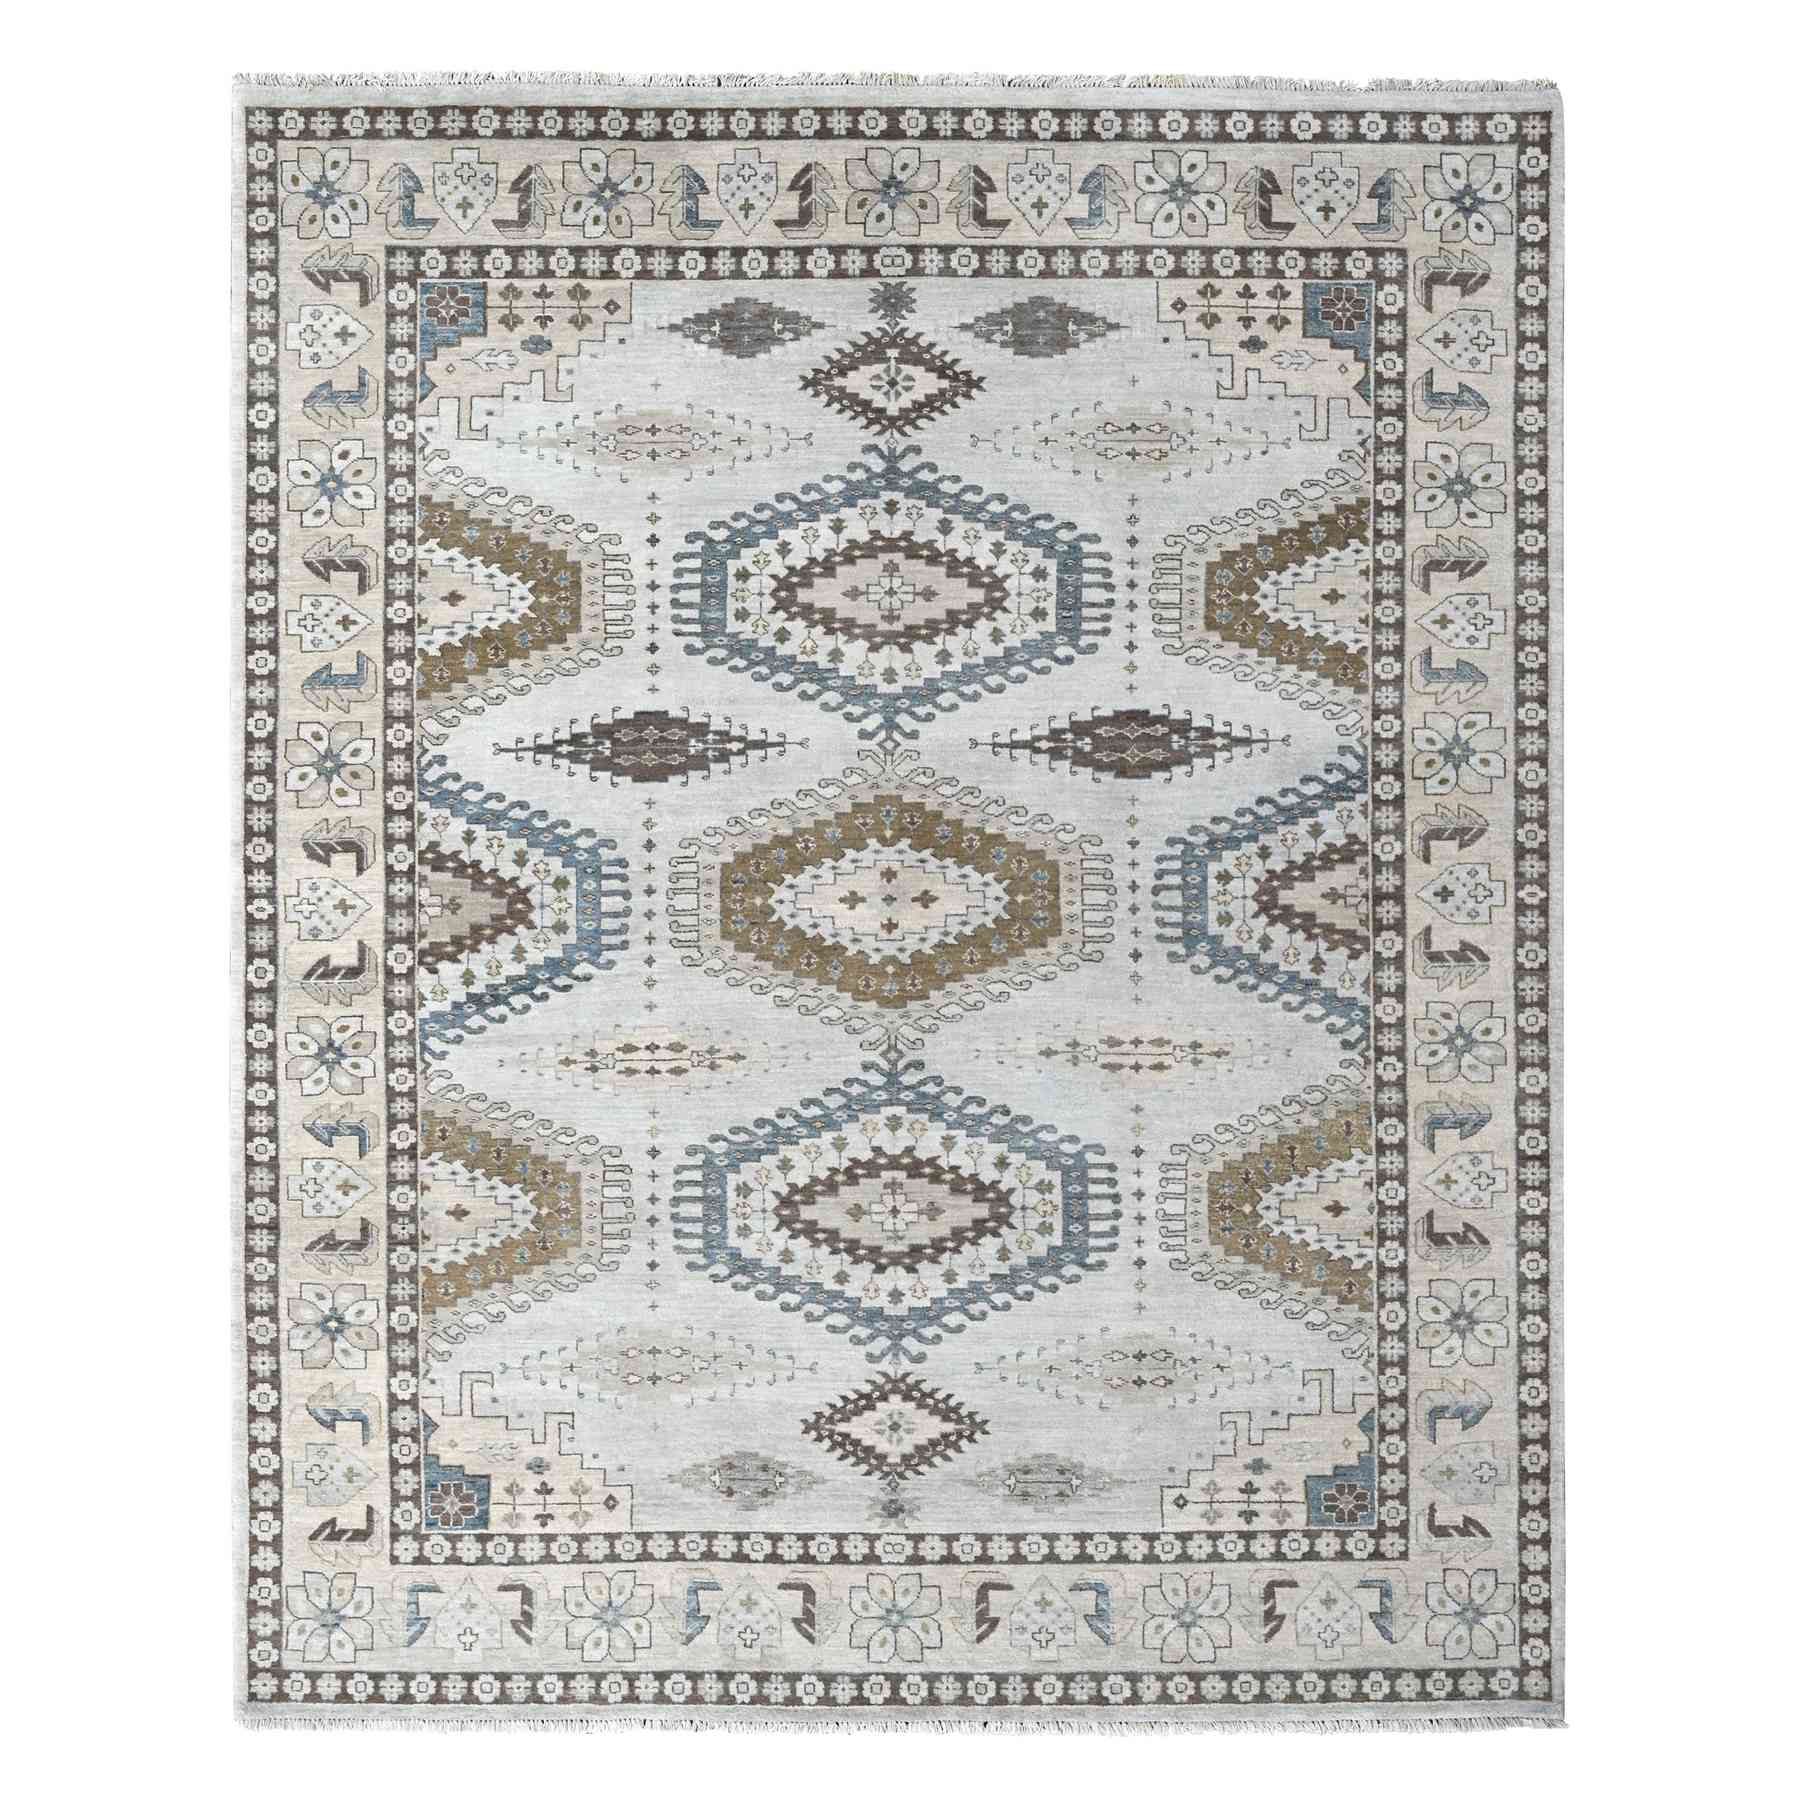 Rainier Gray, Natural Dyes Denser Weave, Hand Knotted Persian Village Inspired with Medallions Design, Soft and Velvety Wool, Soft Pile, Oriental Rug